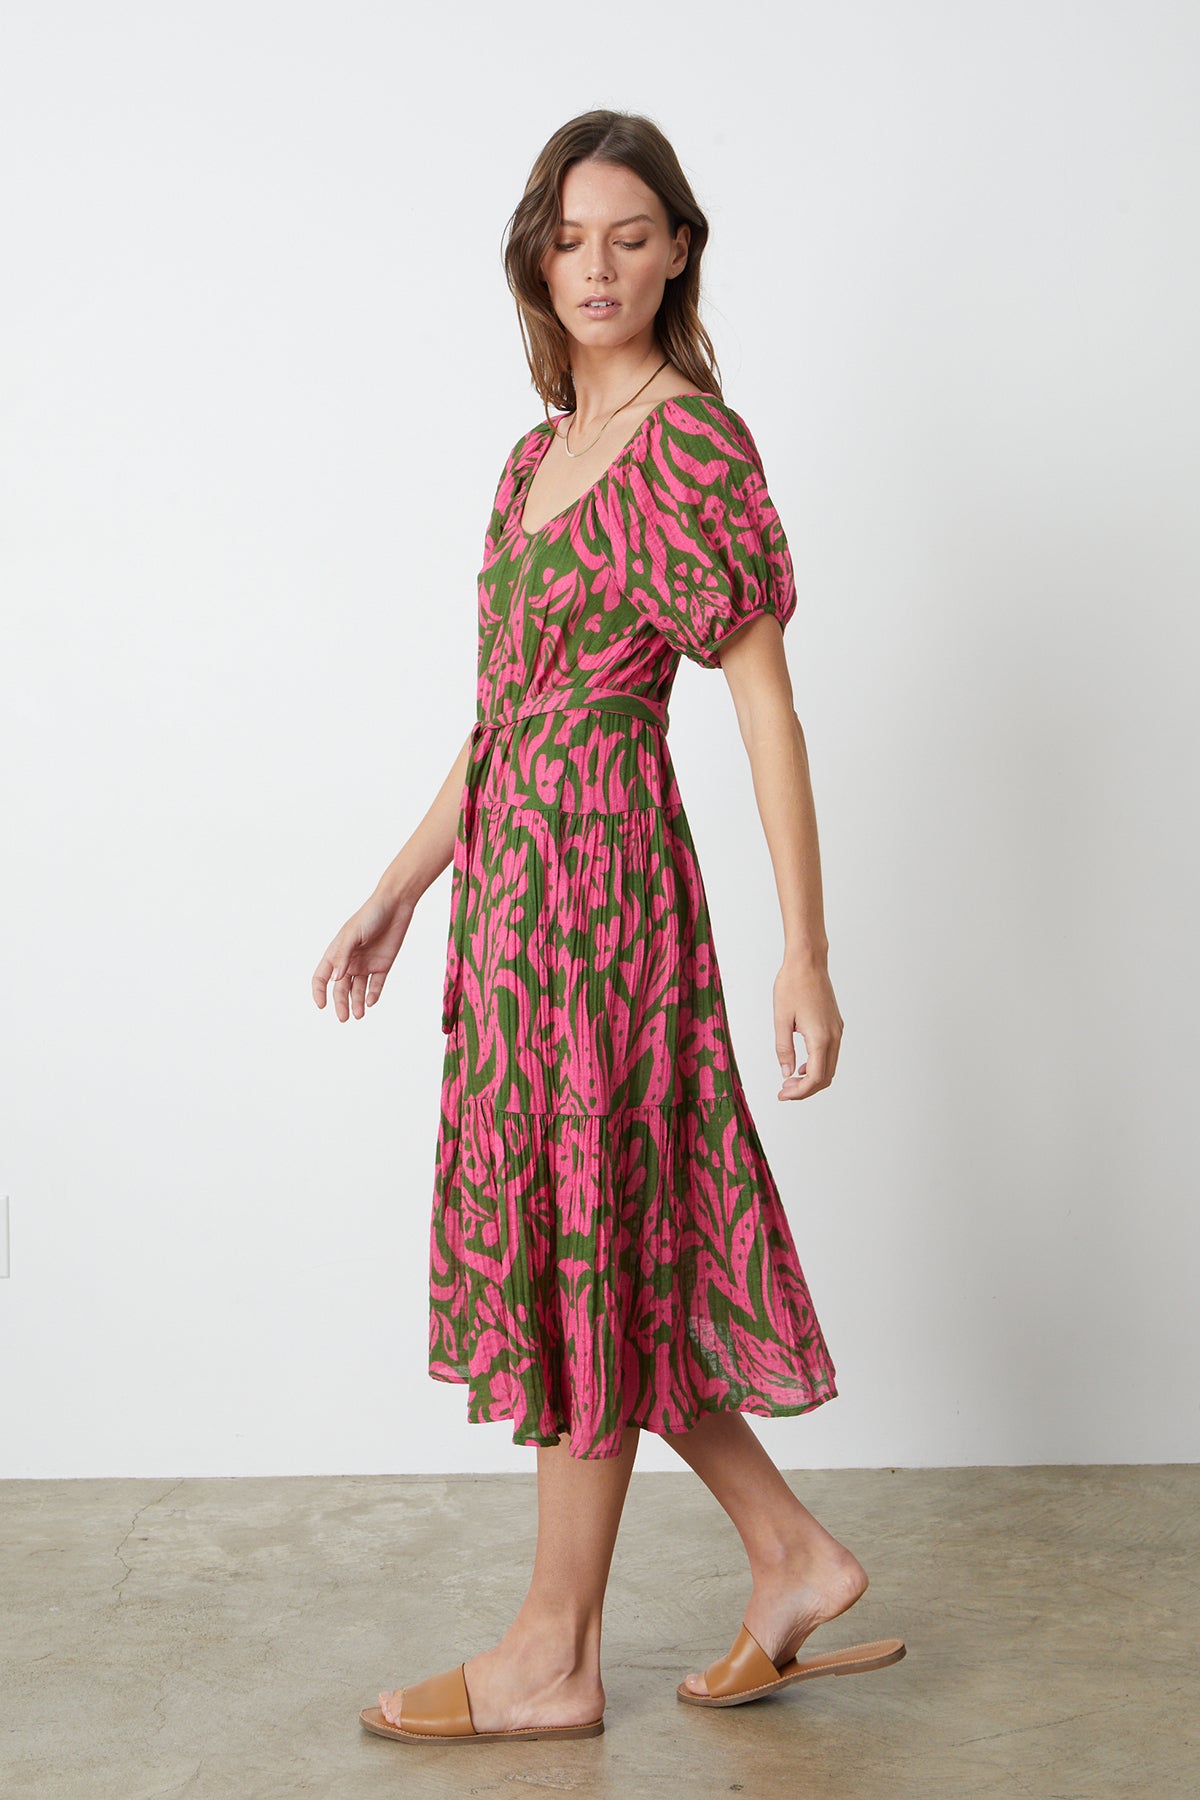 The model is wearing a Velvet by Graham & Spencer MADILYN PRINTED COTTON GAUZE MIDI DRESS in pink and green.-26342678364353